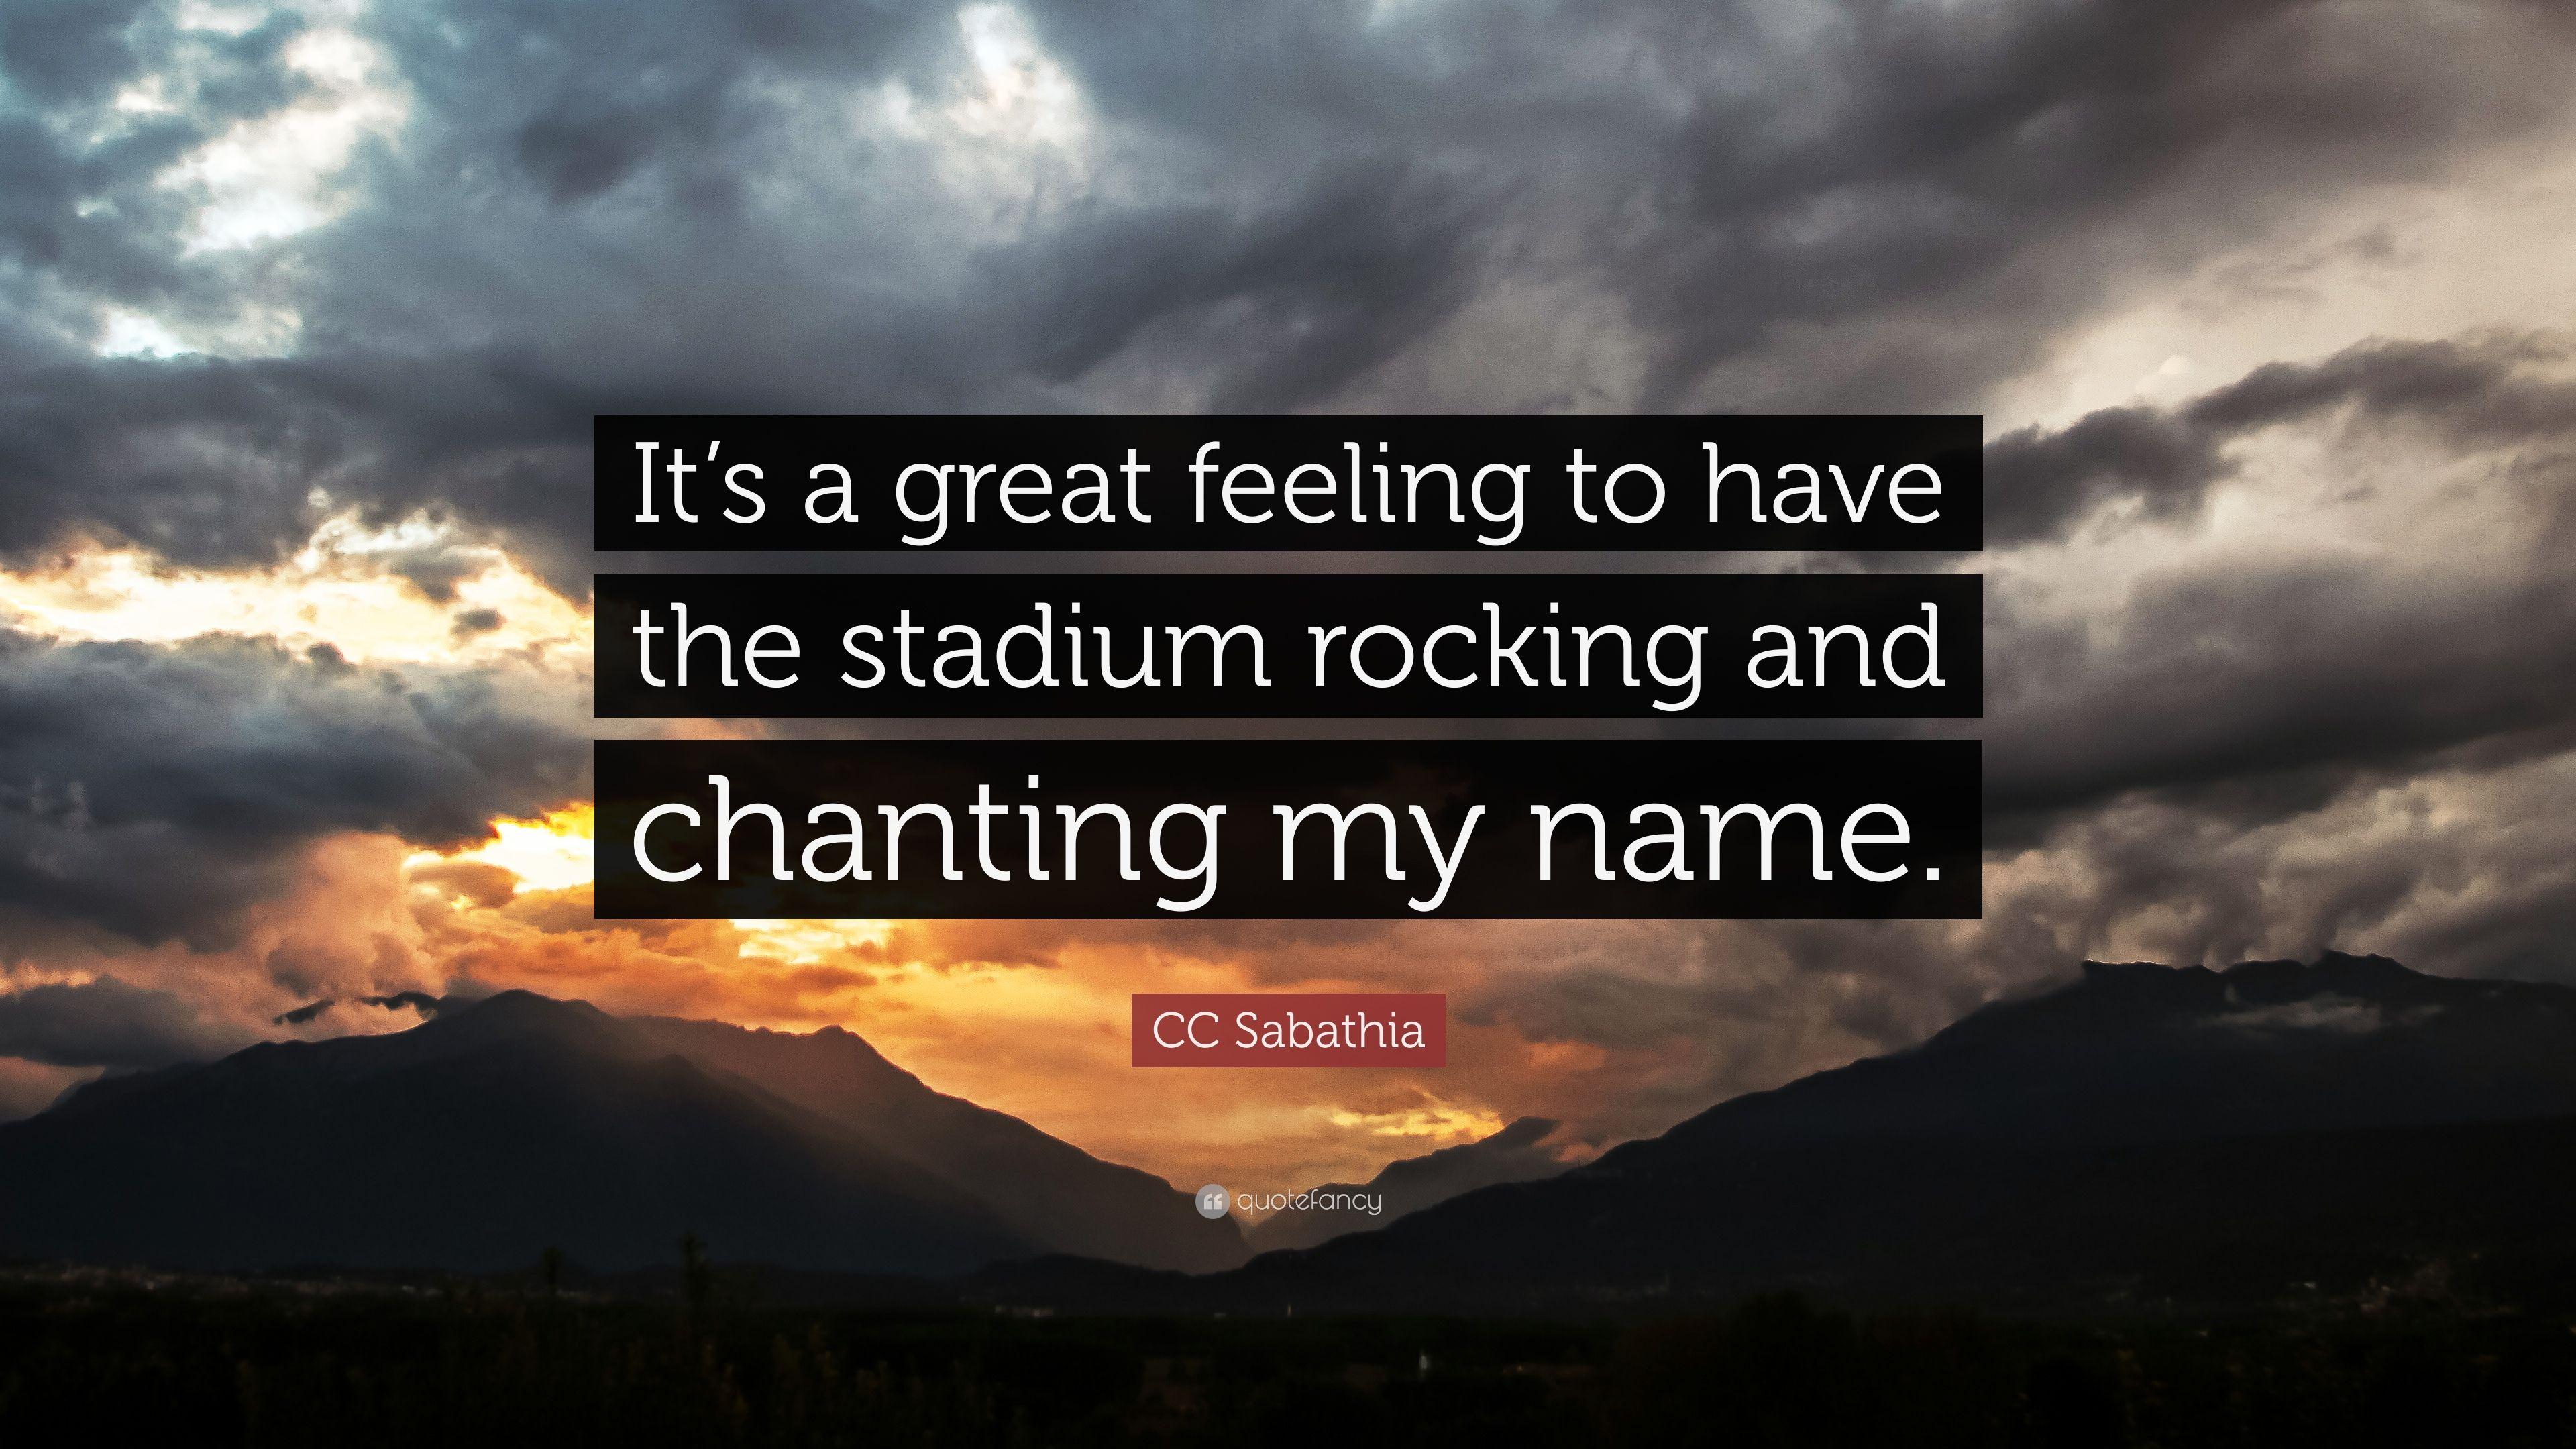 CC Sabathia Quote: “It's a great feeling to have the stadium